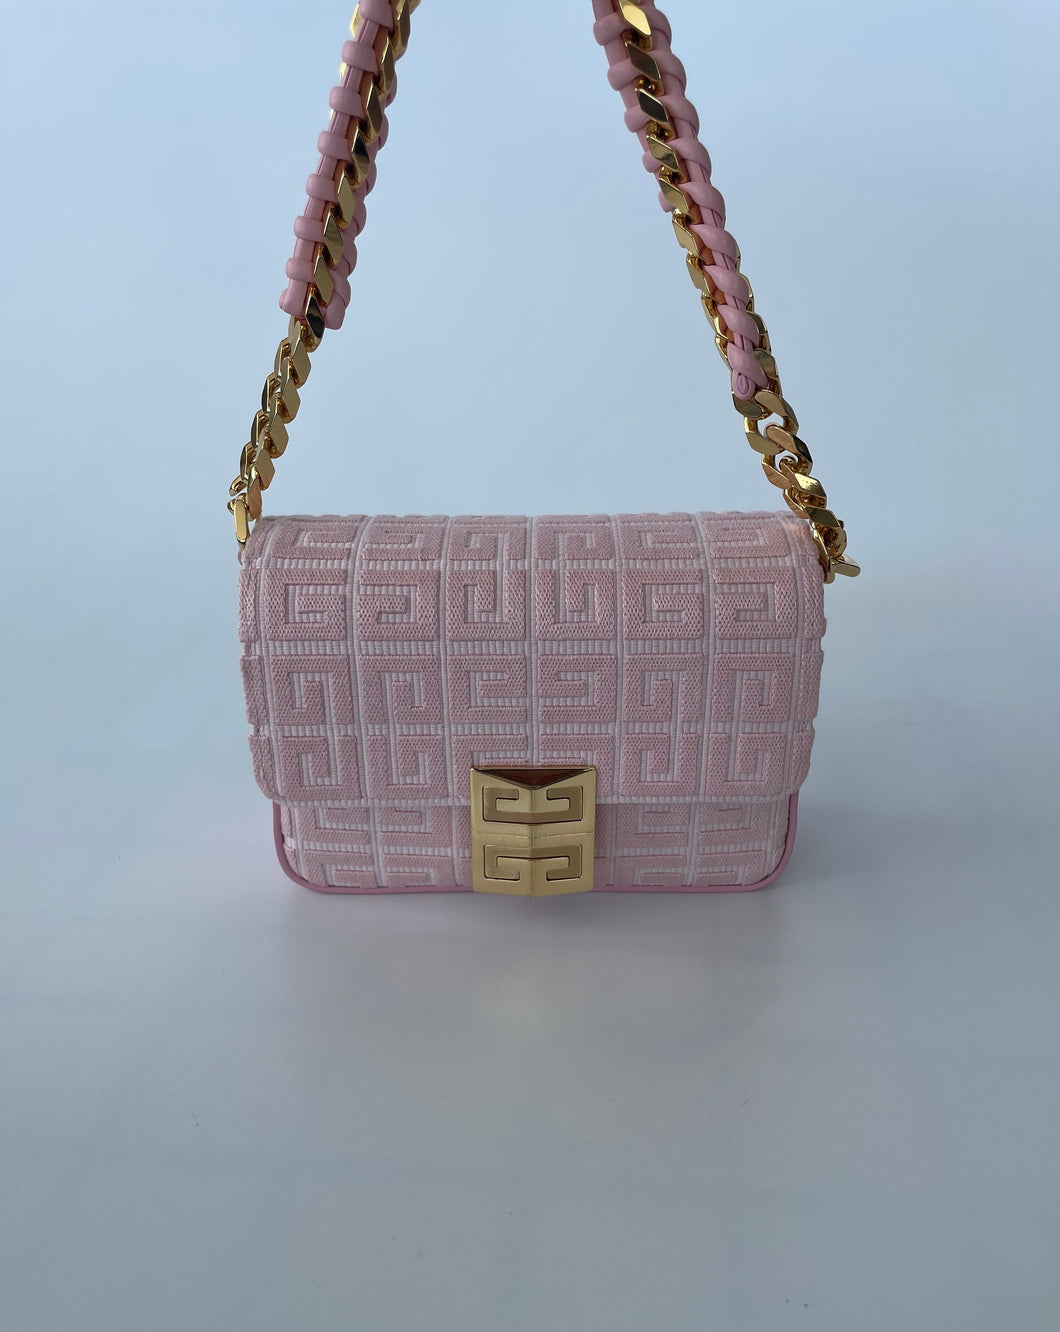 Givenchy, givenchy crossbody bag, givenchy pink bag, givenchy bag, 4g collection, givenchy 4g collection, 4g crossbody bag, givenchy 4g woven chain bag in pink, preluxe, preloved, preloved givenchy